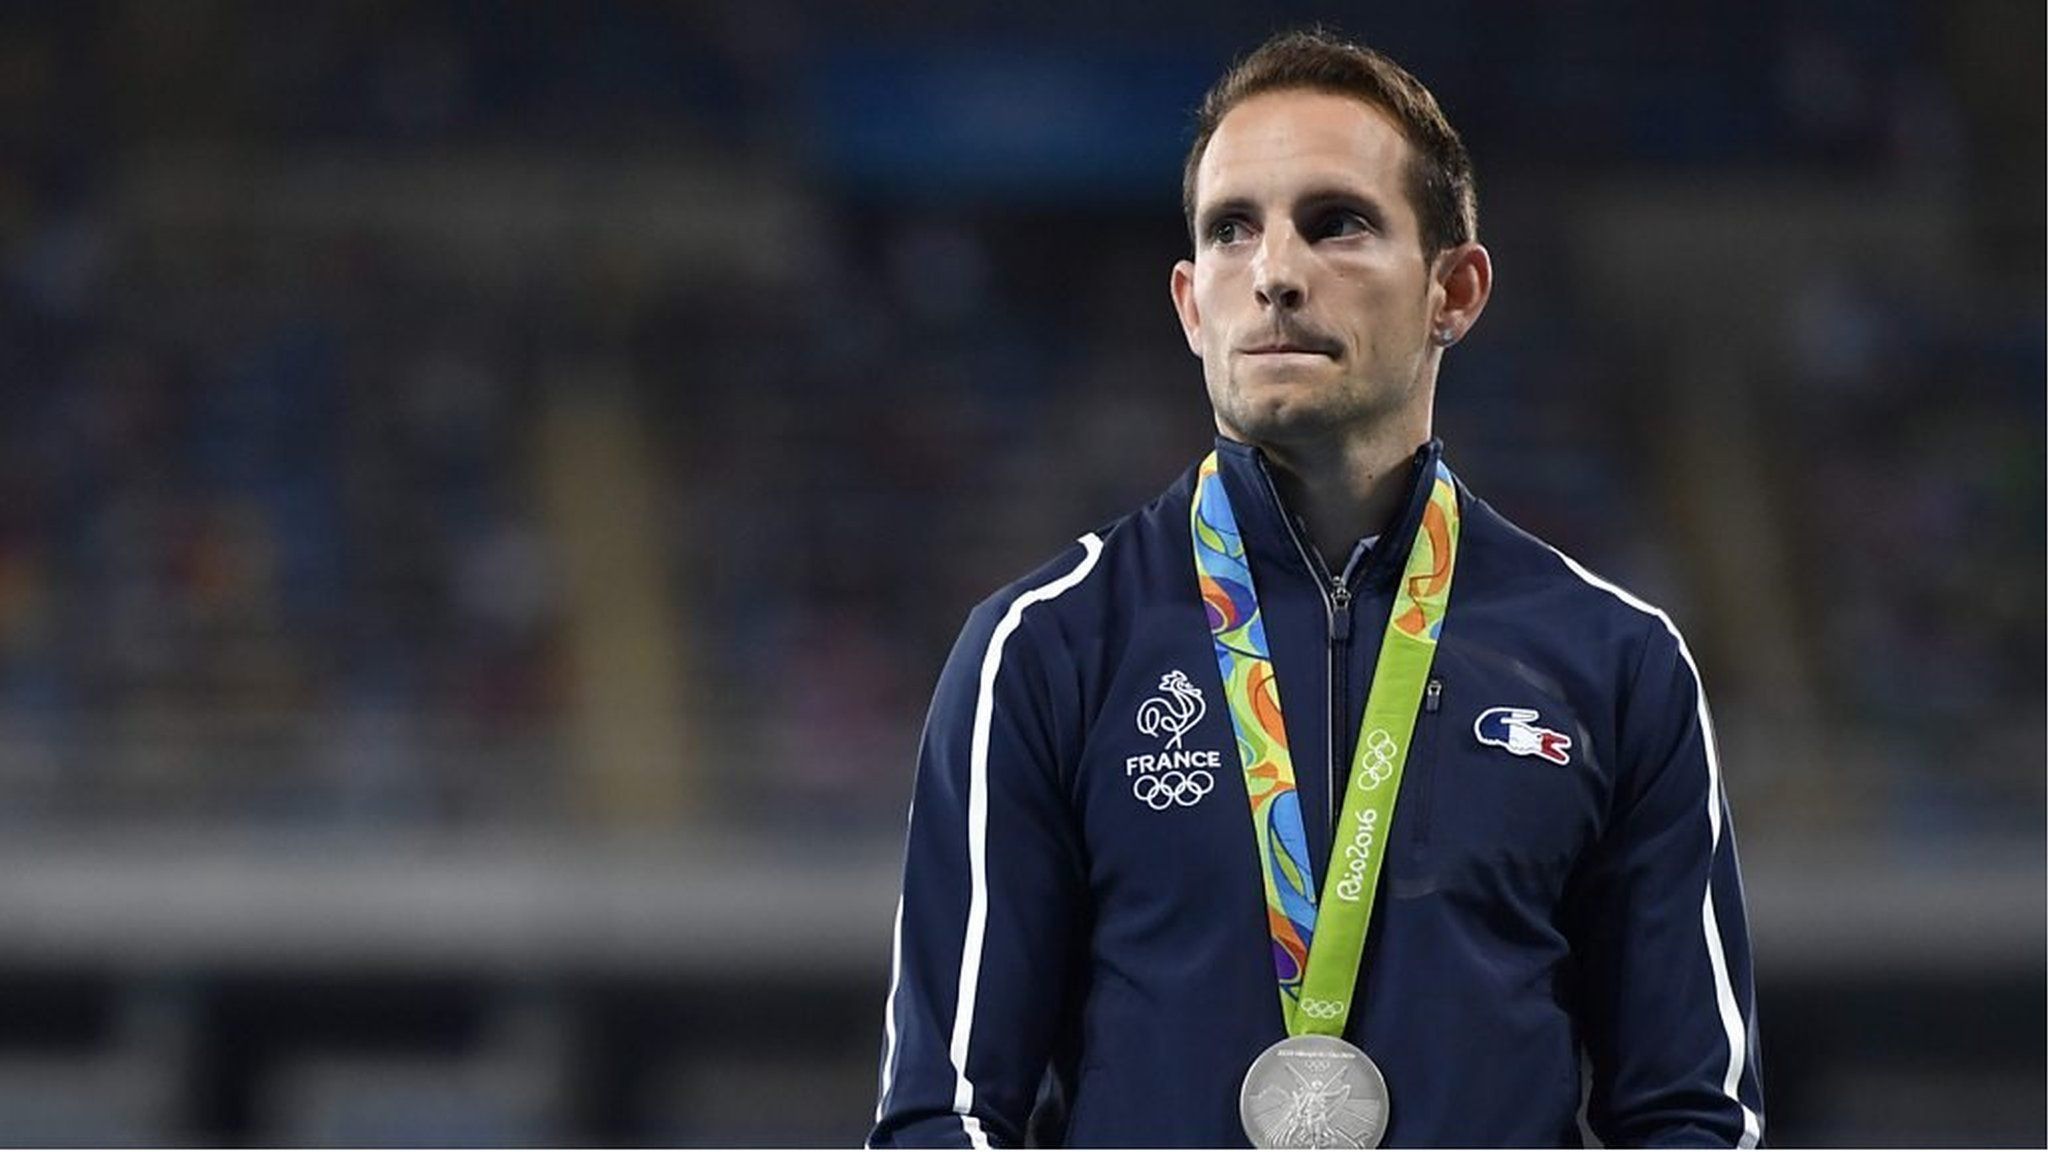 Renaud Lavillenie reacts to booing